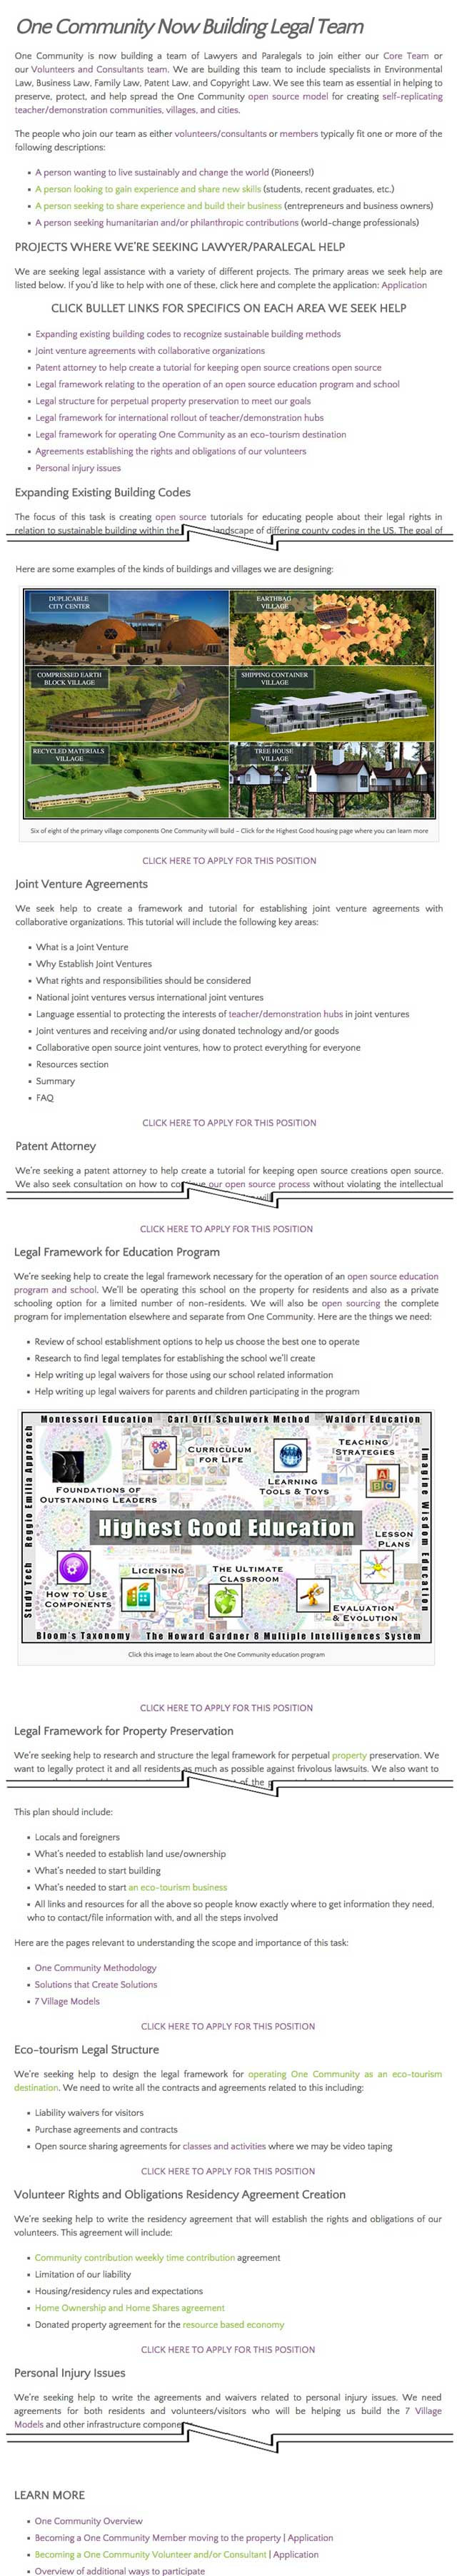 This week we finished updating the Legal Help Wanted page